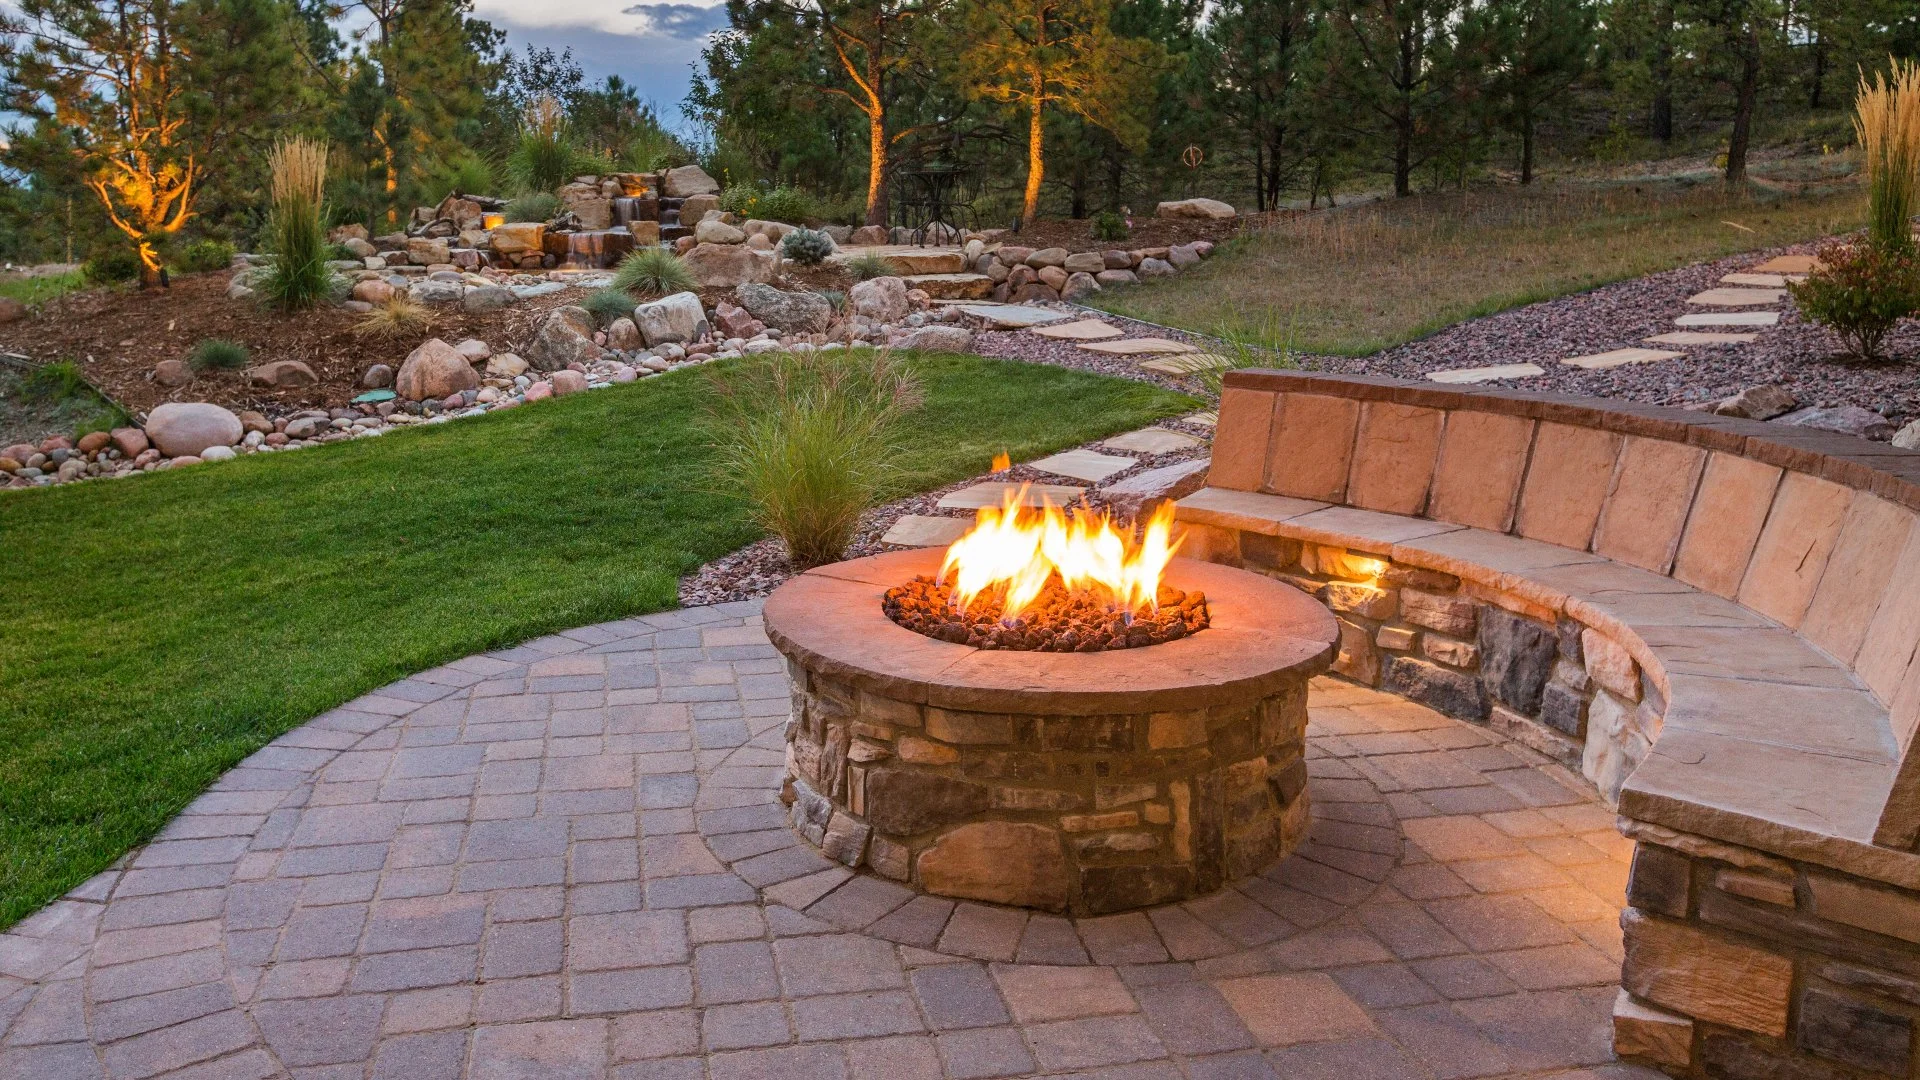 4 Materials That Are Great for Building a Fire Feature